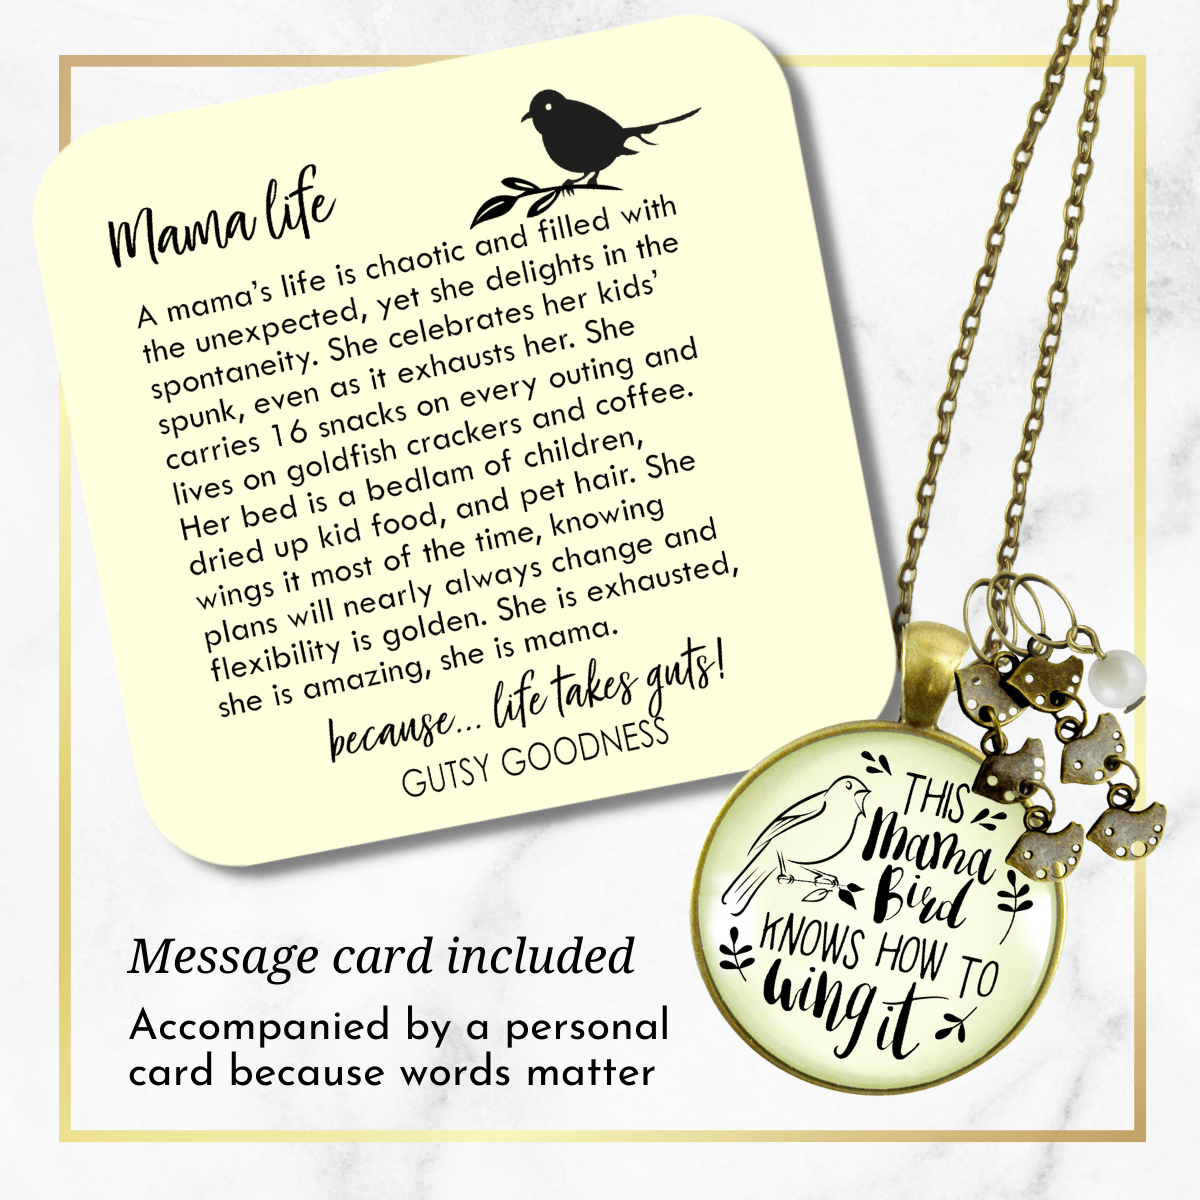 Gutsy Goodness Mama Bird Necklace 6 Kids Wings It Baby Bird Charm Gift Mom Jewelry - 24&quot; - 24&quot; - Gutsy Goodness;Mama Bird Necklace 6 Kids Wings It Baby Bird Charm Gift Mom Jewelry - 24&Quot; - 24&Quot; - 24&Quot; - Gutsy Goodness Handmade Jewelry Gifts